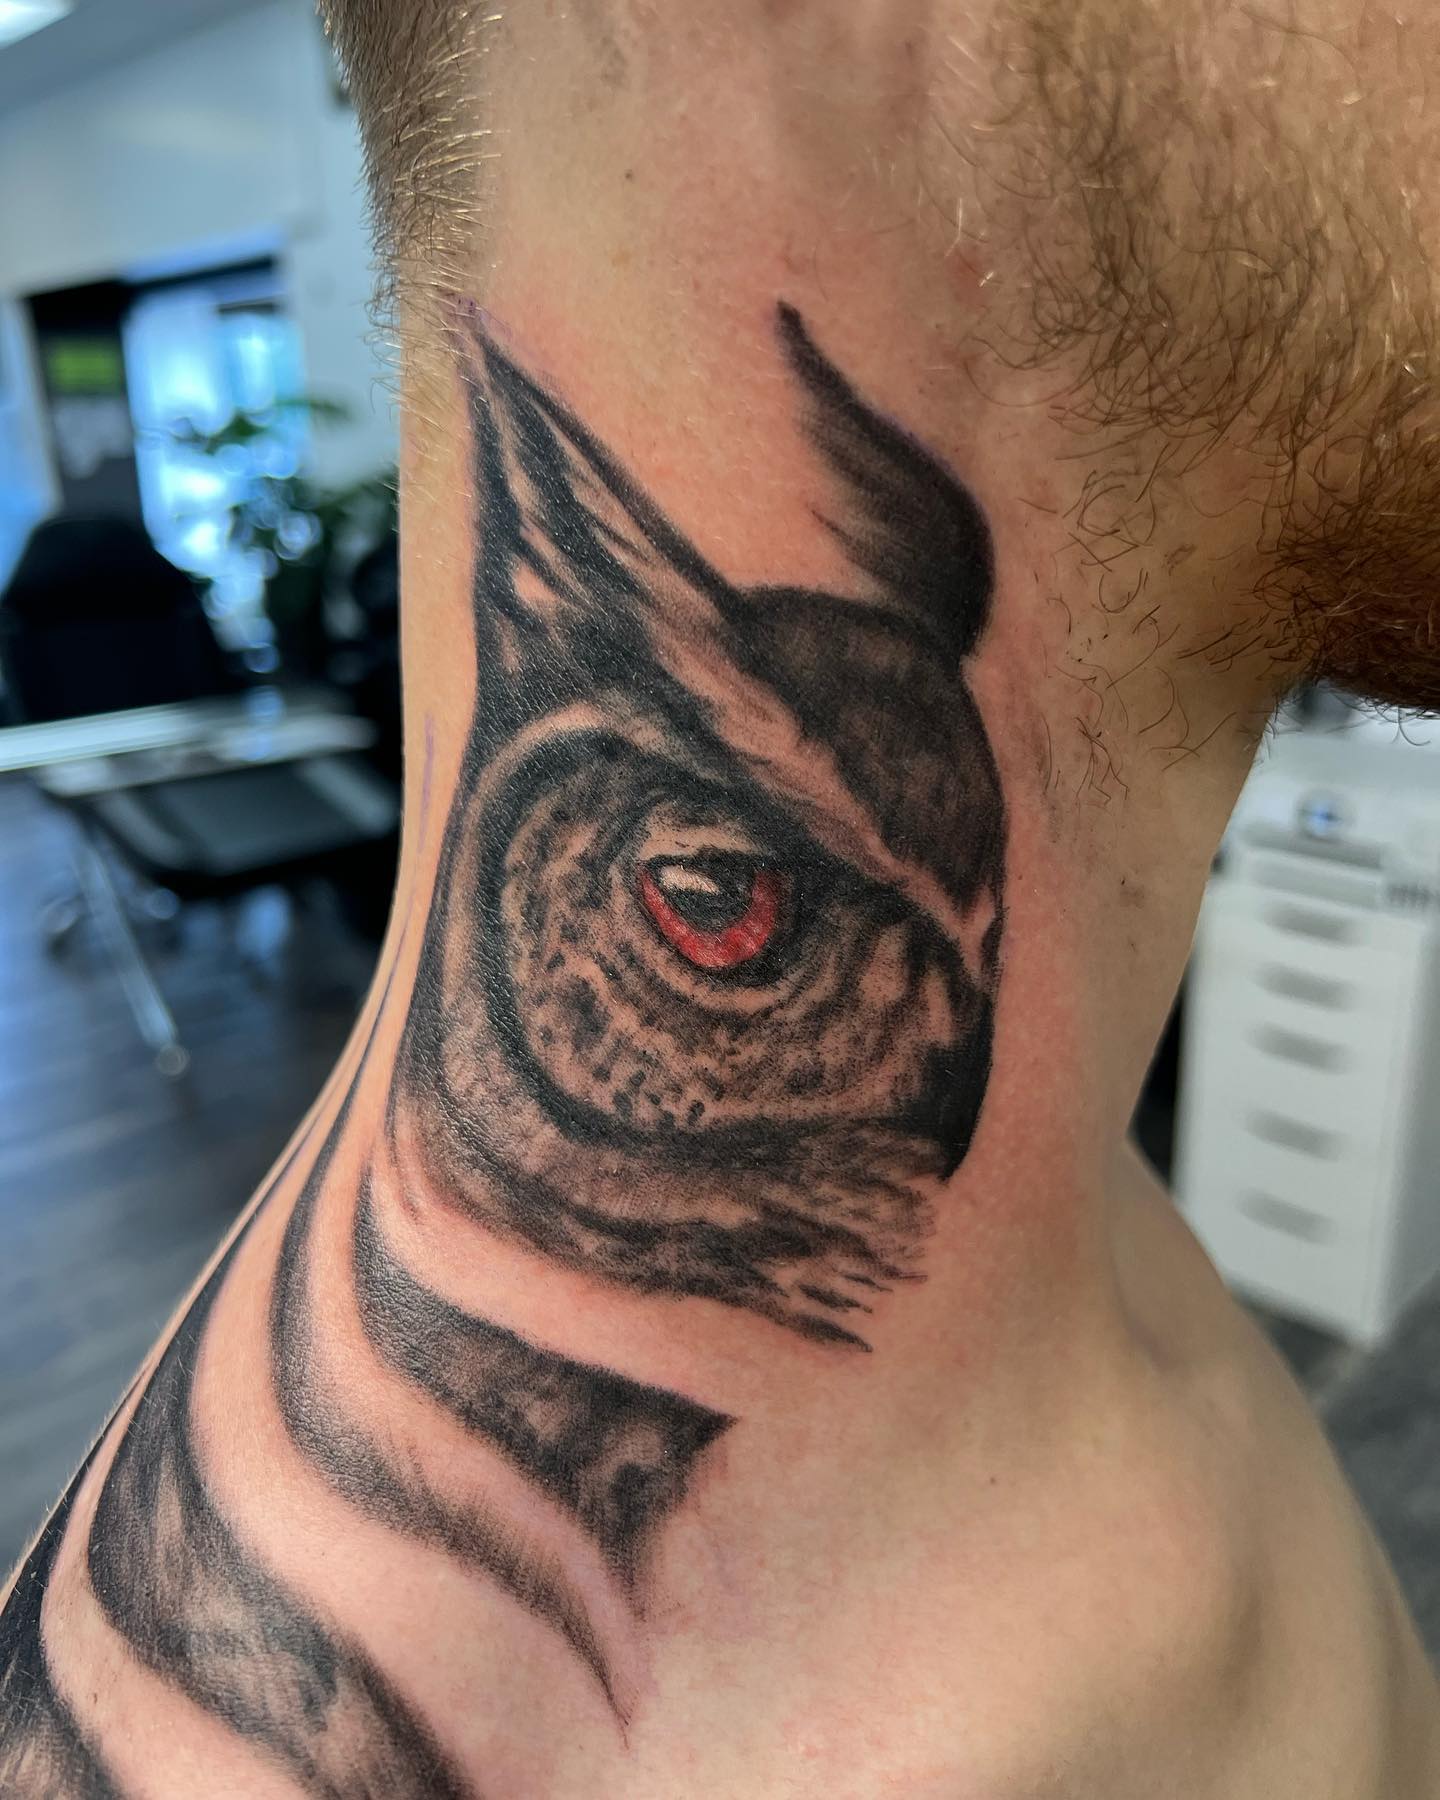 Owl tattoos represent knowledge and wisdom. With this red eye owl, you will show your wisdom.